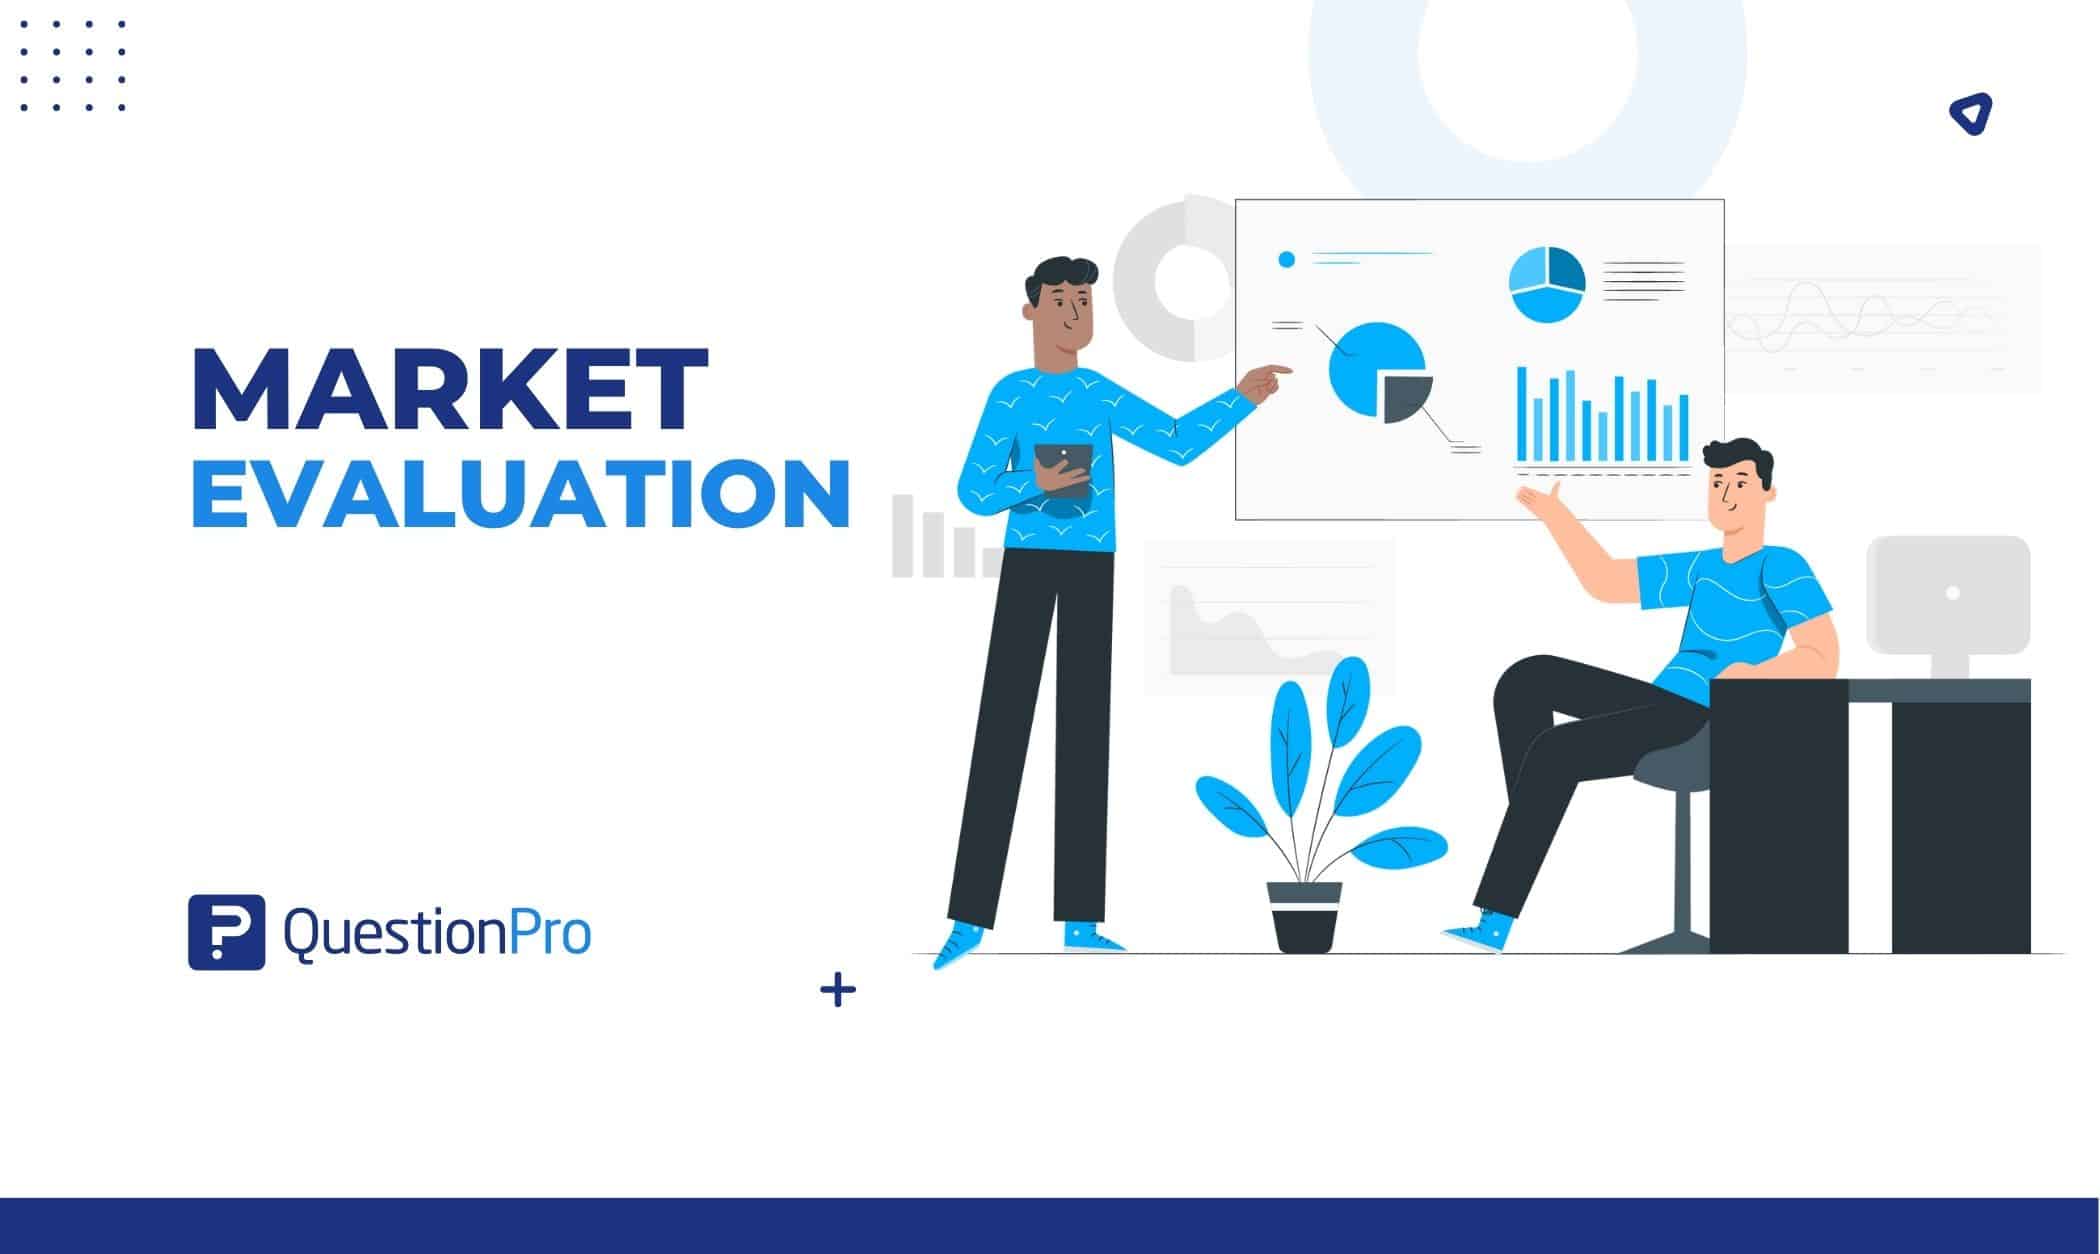 Market evaluation identifies the brand's market size, growth strengths, & shortcomings. It shows the current trends that need to be followed.